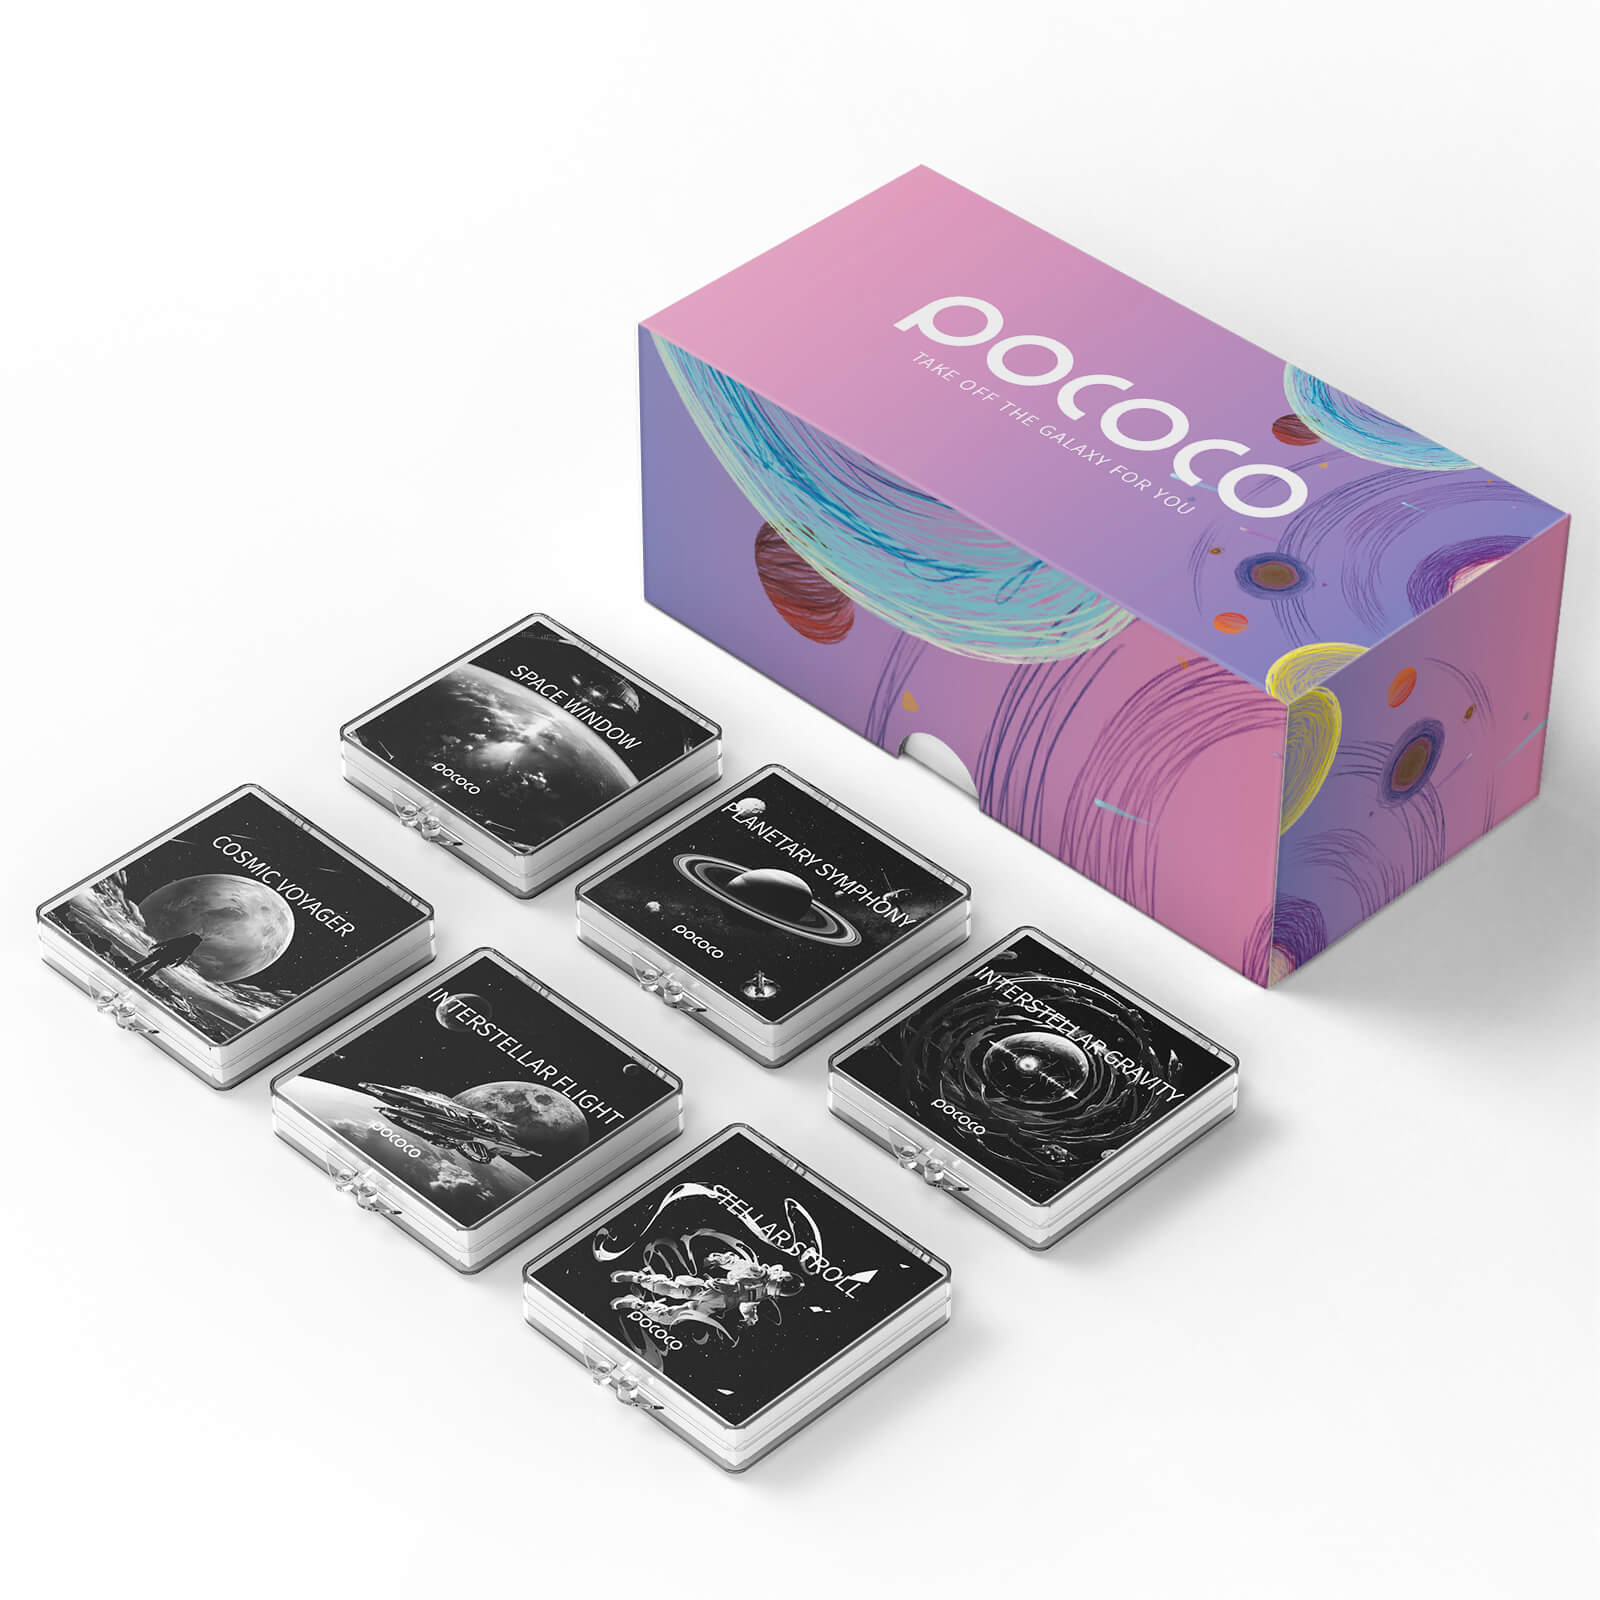 POCOCO GALAXY PROJECTOR UNBOXING/REVIEW 